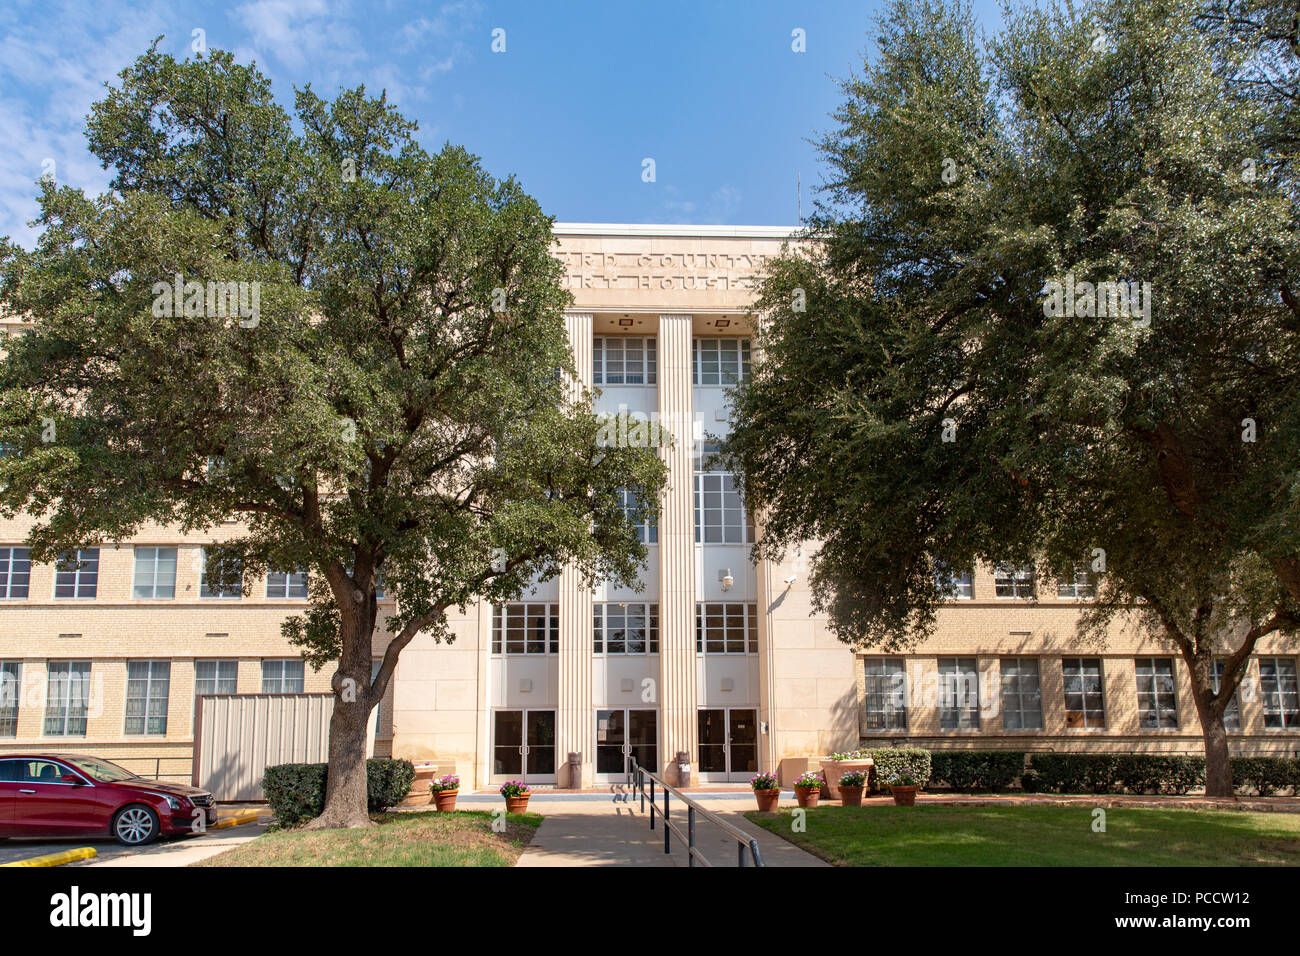 The Howard county courthouse in Big Spring Texas in Modern style Stock Photo